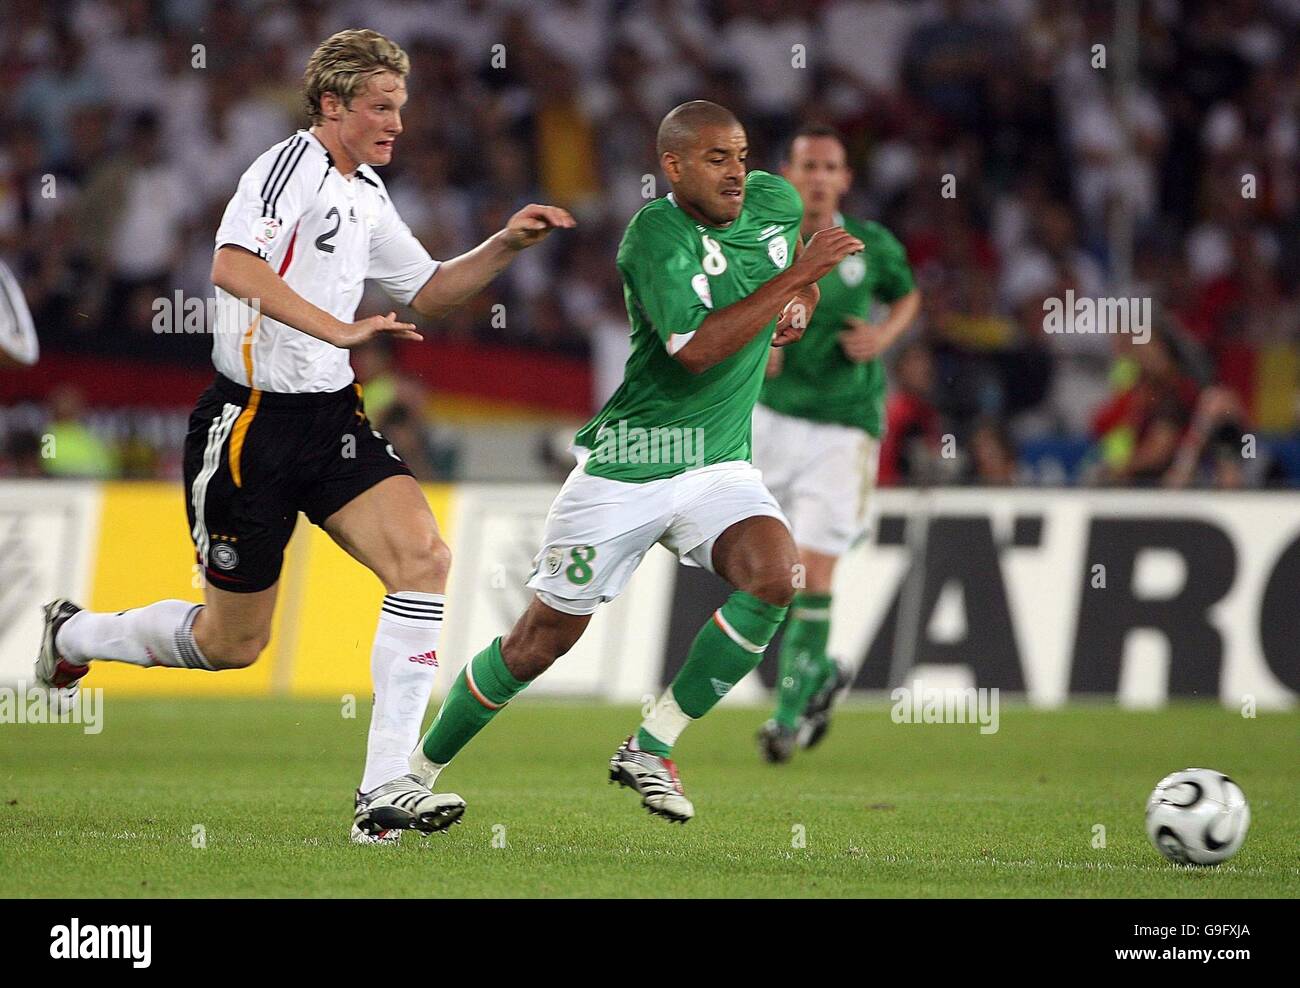 Republic of Ireland's Steven Reid in action against Germany's Marcell Jansen (L) during the European Championship qualifying match at the Gottlieb-Daimler Stadium, Stuttgart, Germany. Stock Photo